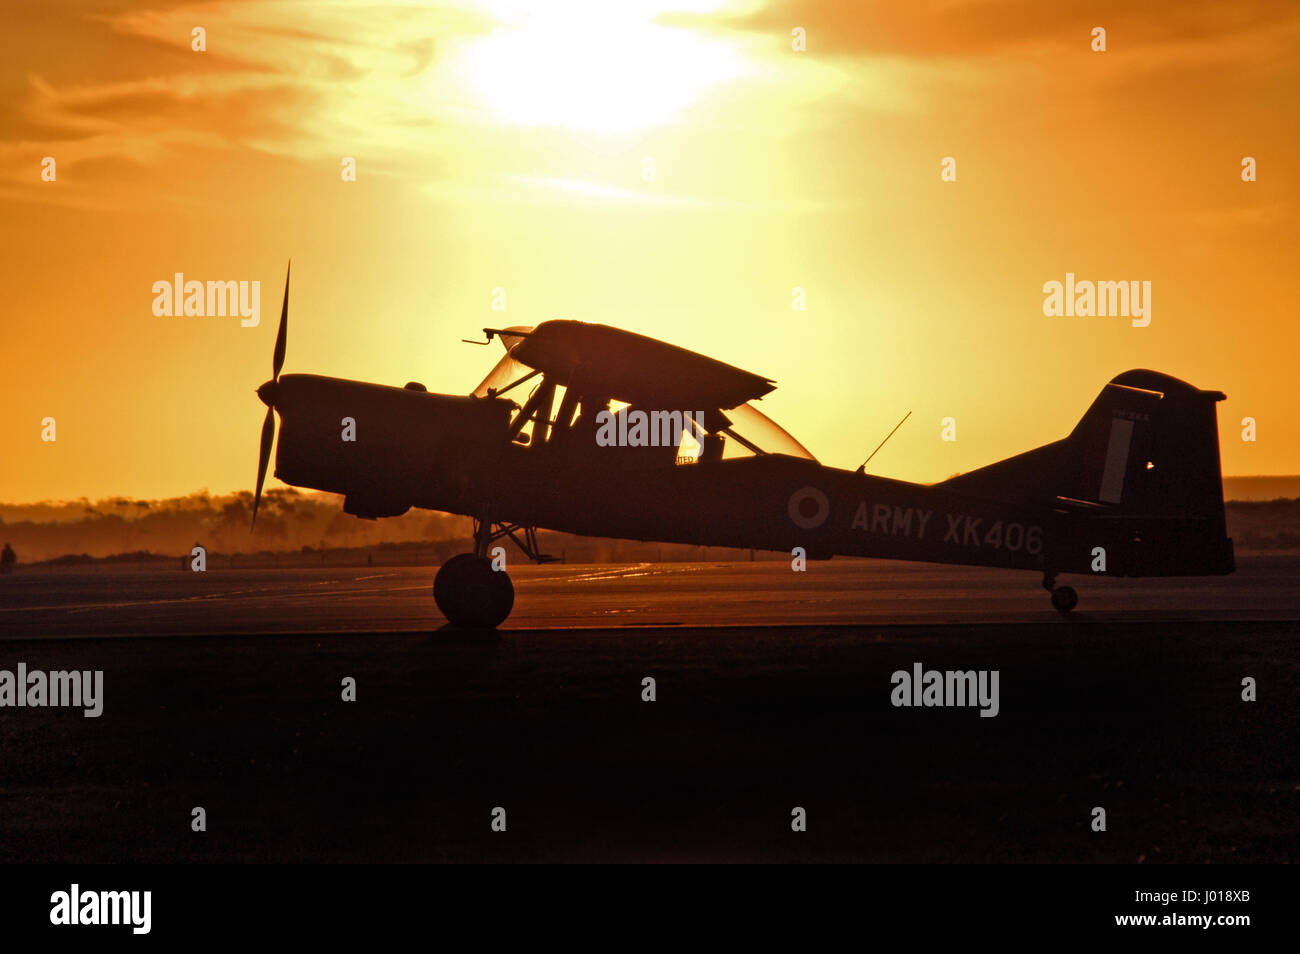 A silhouetted Royal Australian Army Auster observation aircraft at sunset. Stock Photo